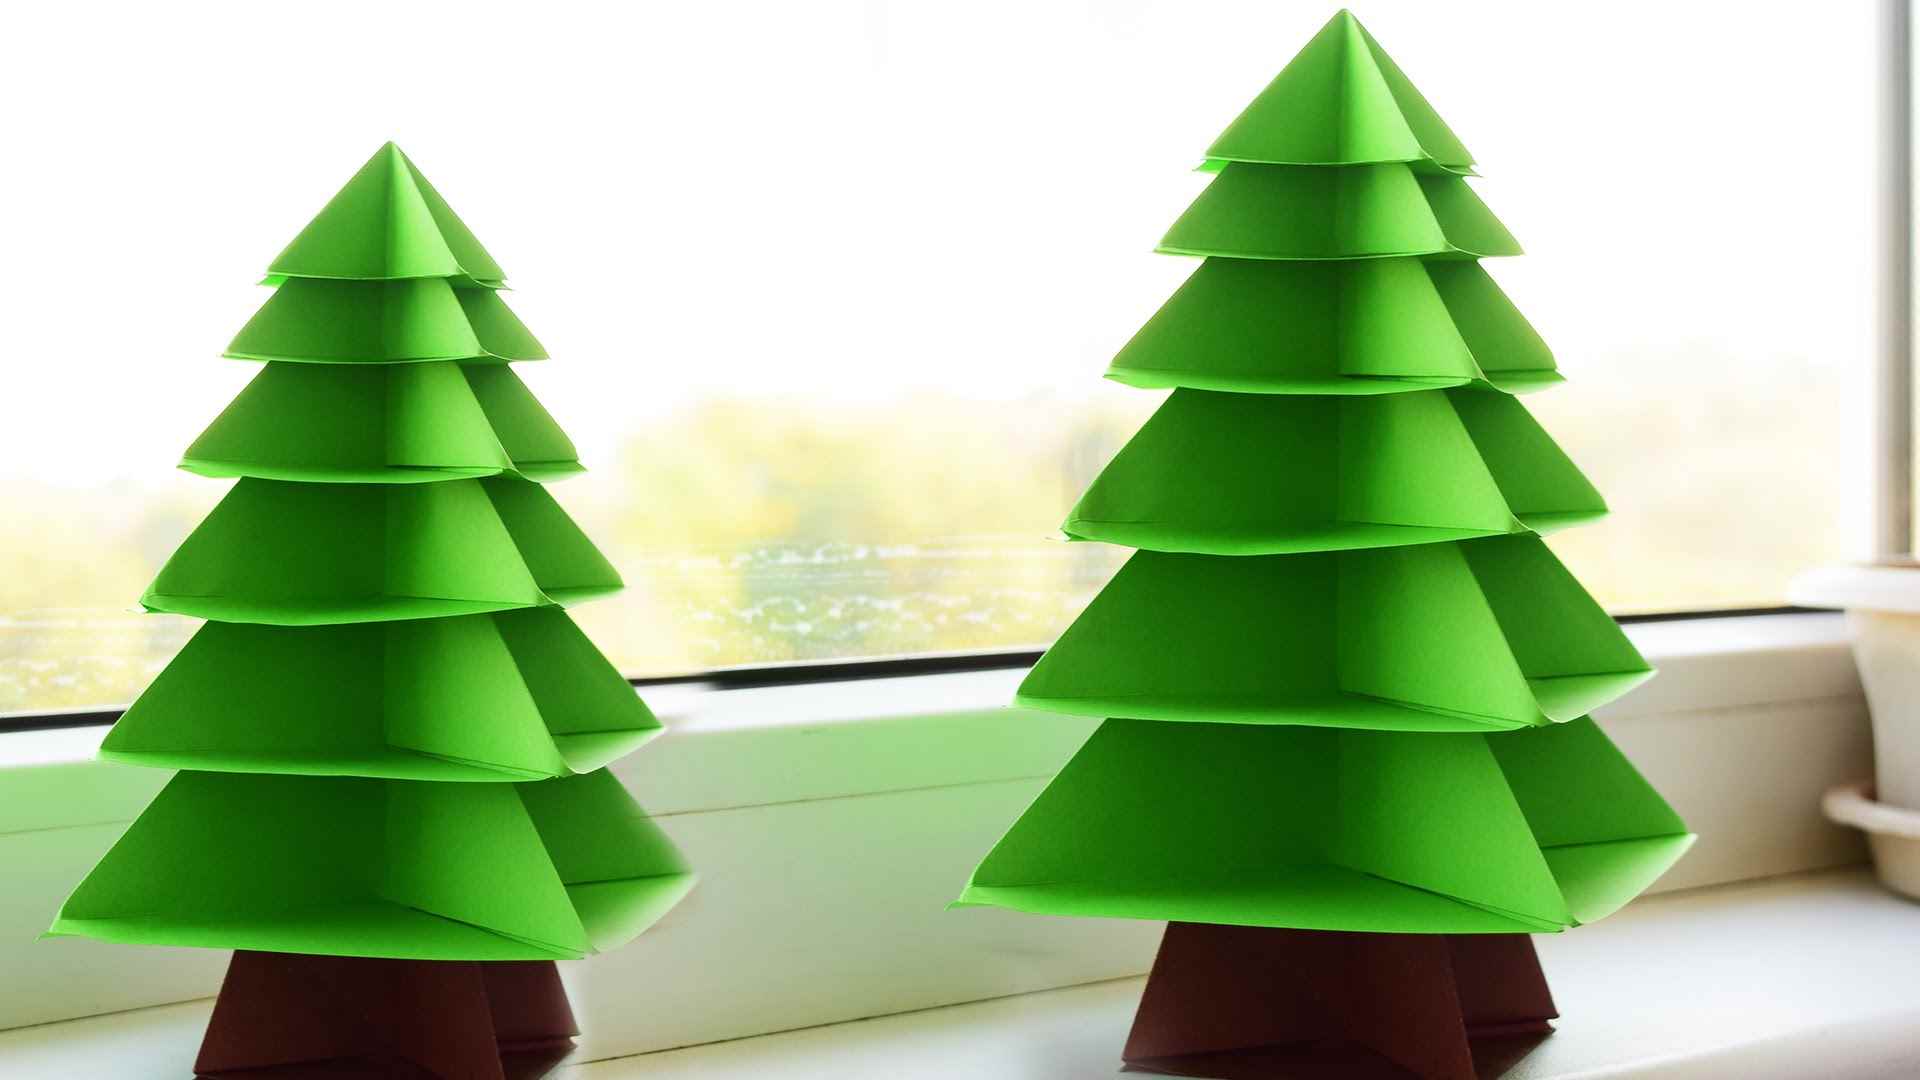 the idea of ​​creating a bright do-it-yourself cardboard Christmas tree